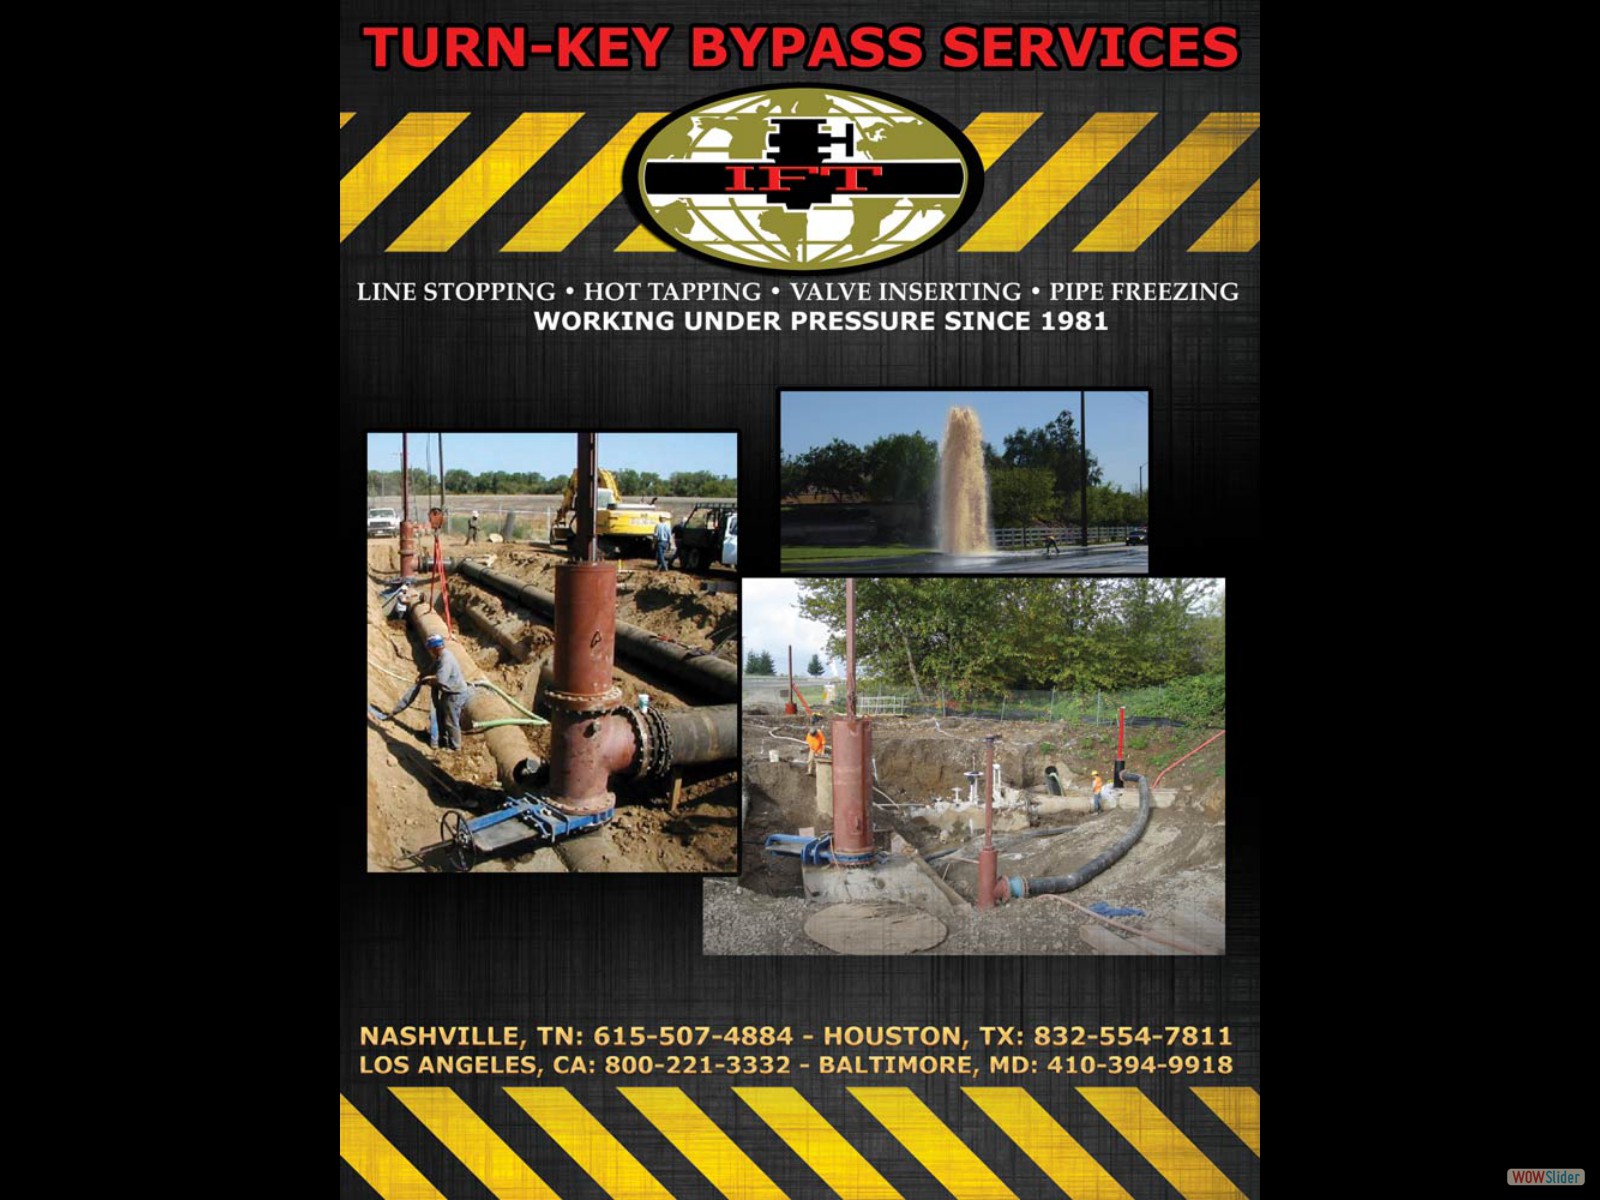 IFT Bypass Services Nationwide